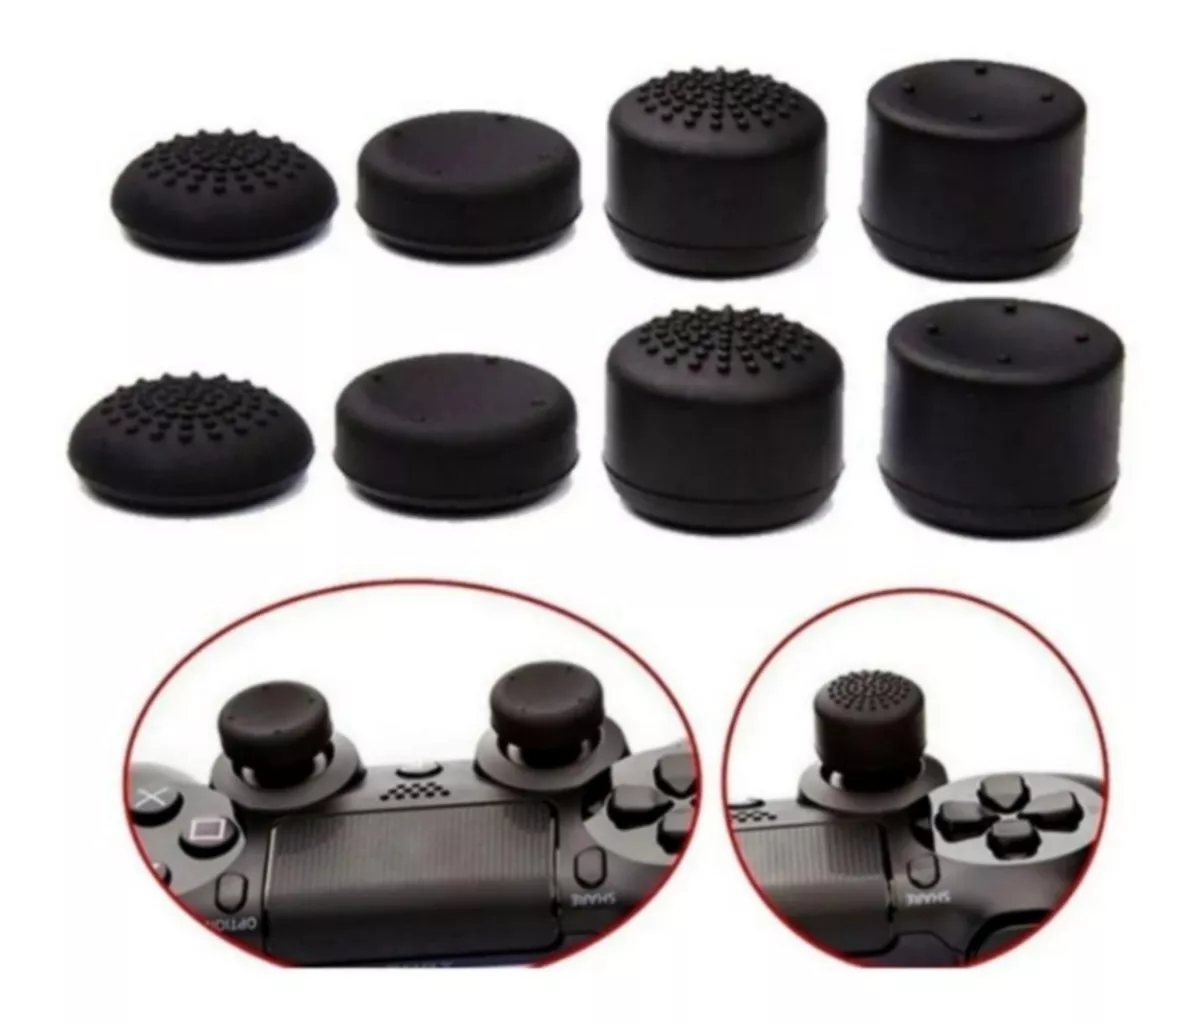 Kit 8 Grips Ps3 Ps4 Ps5 Xbox One S X Extensor Controle